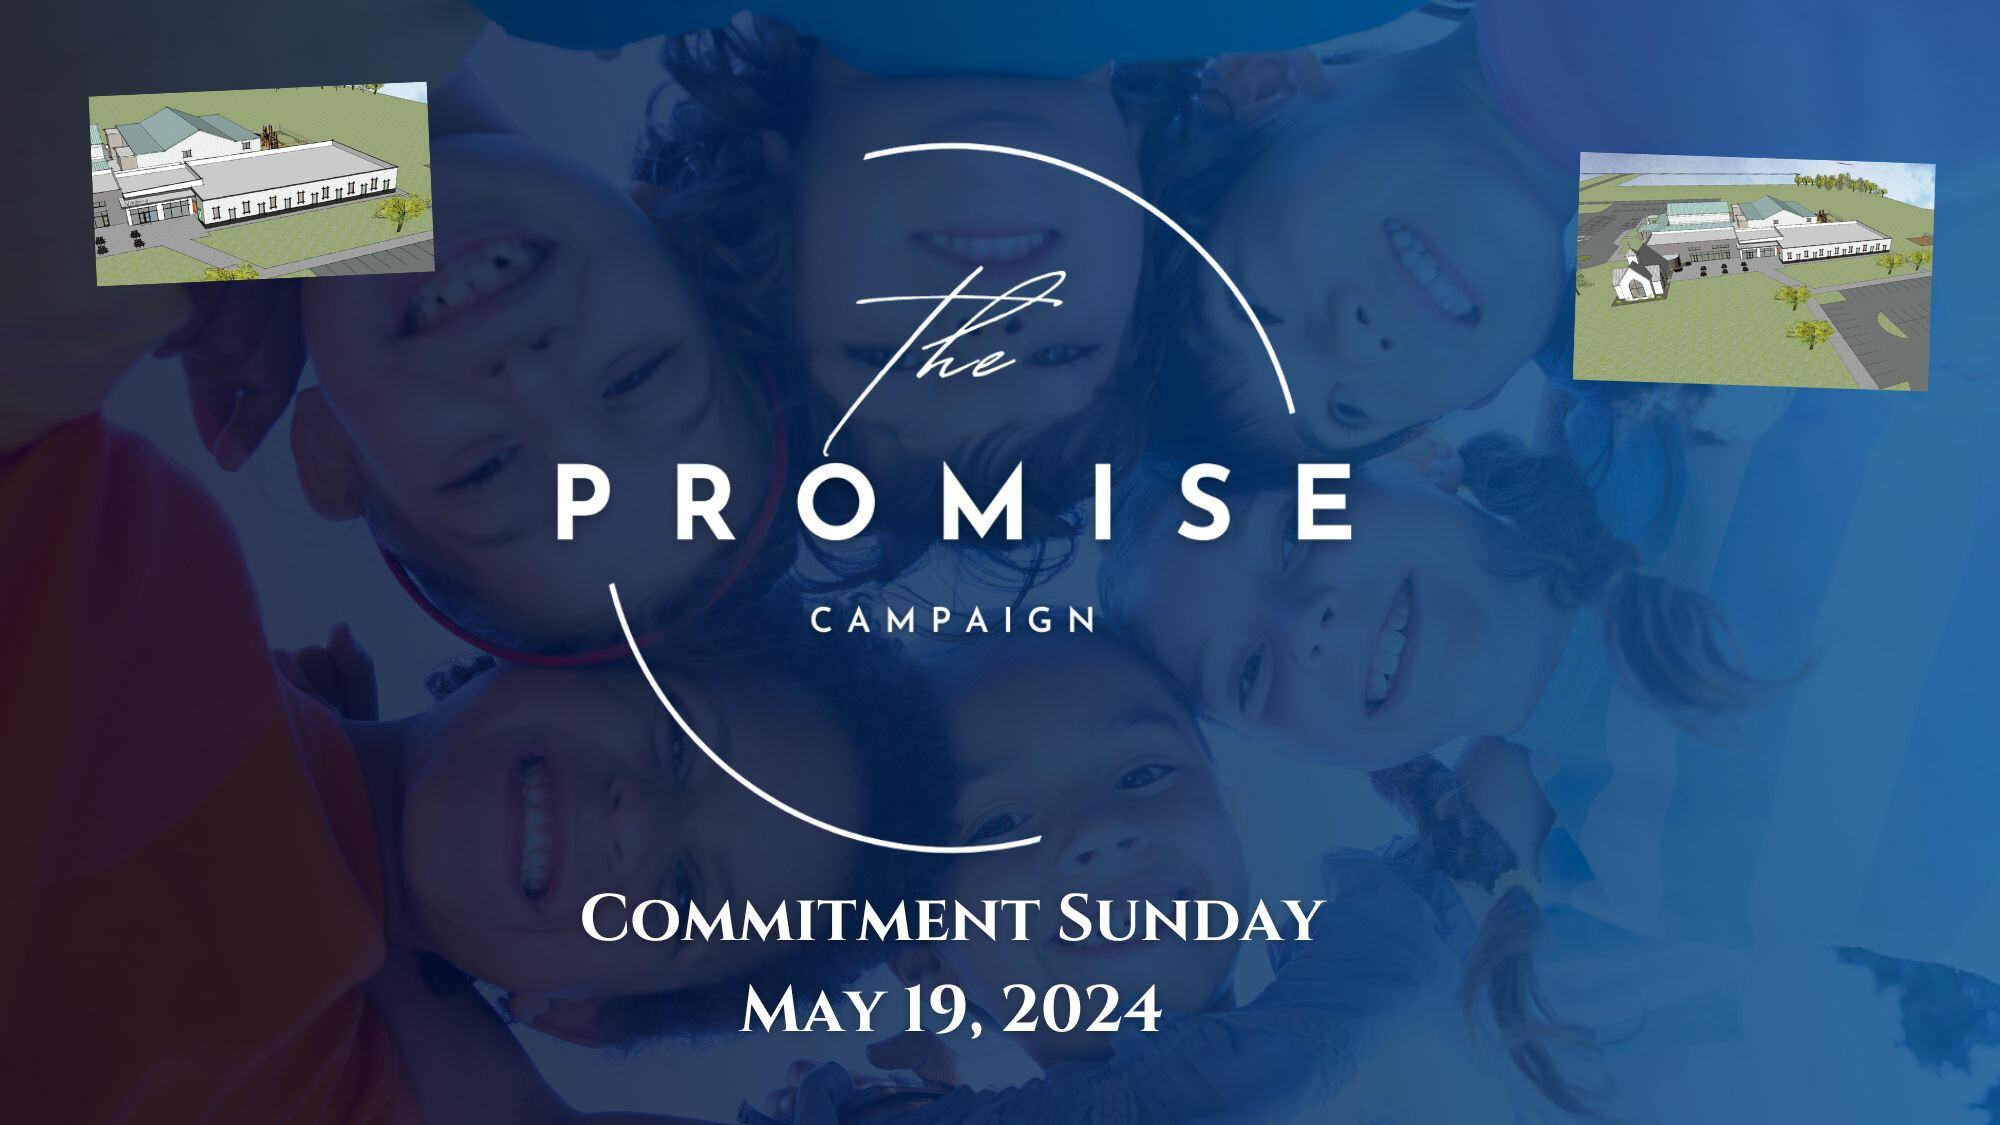 "The Promise" Commitment Sunday